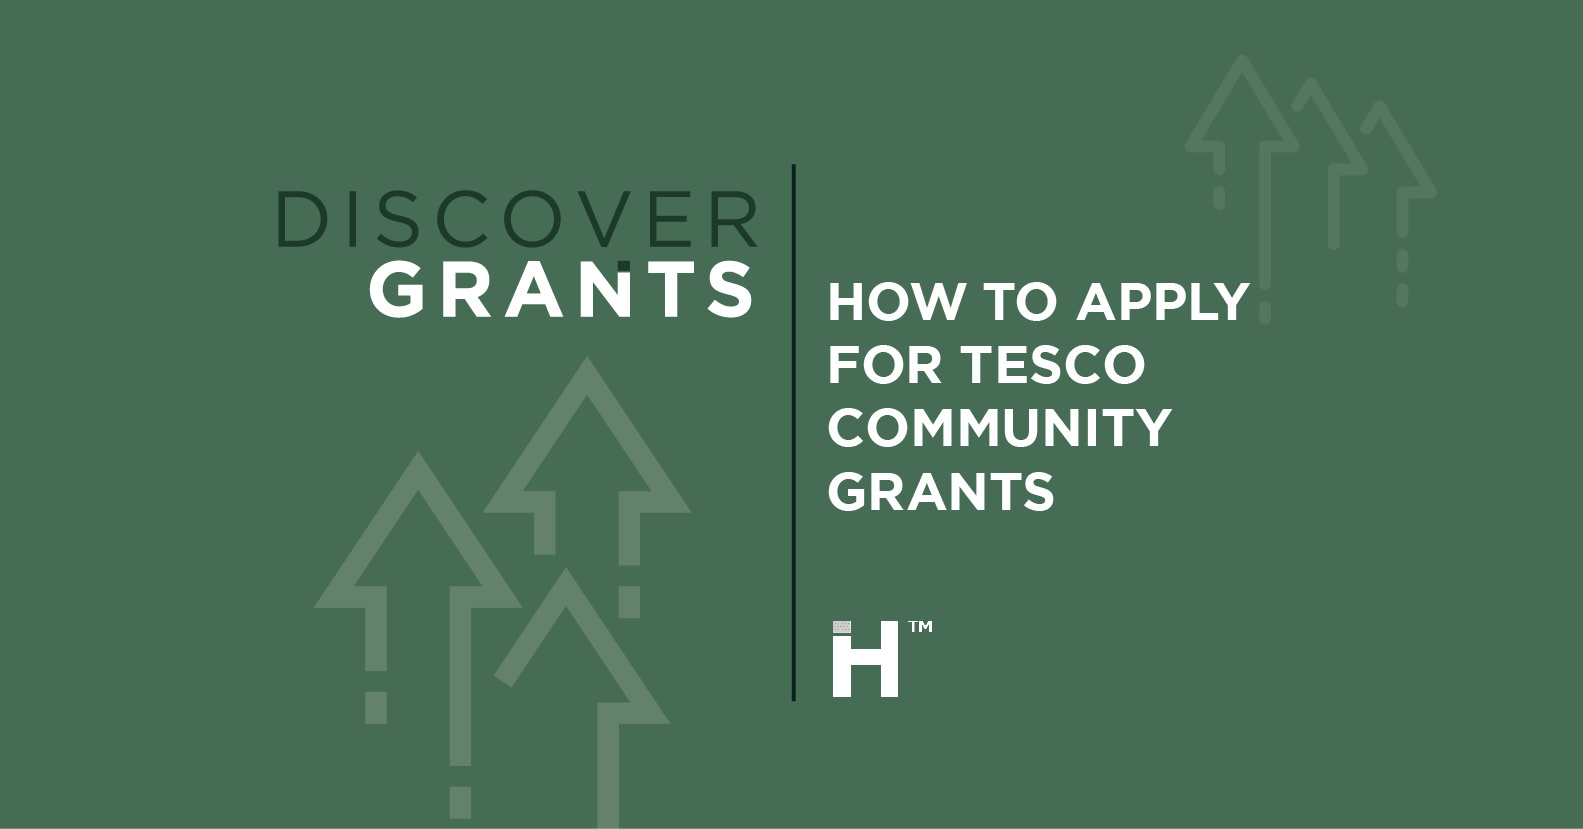 How to Apply for Tesco Community Grants